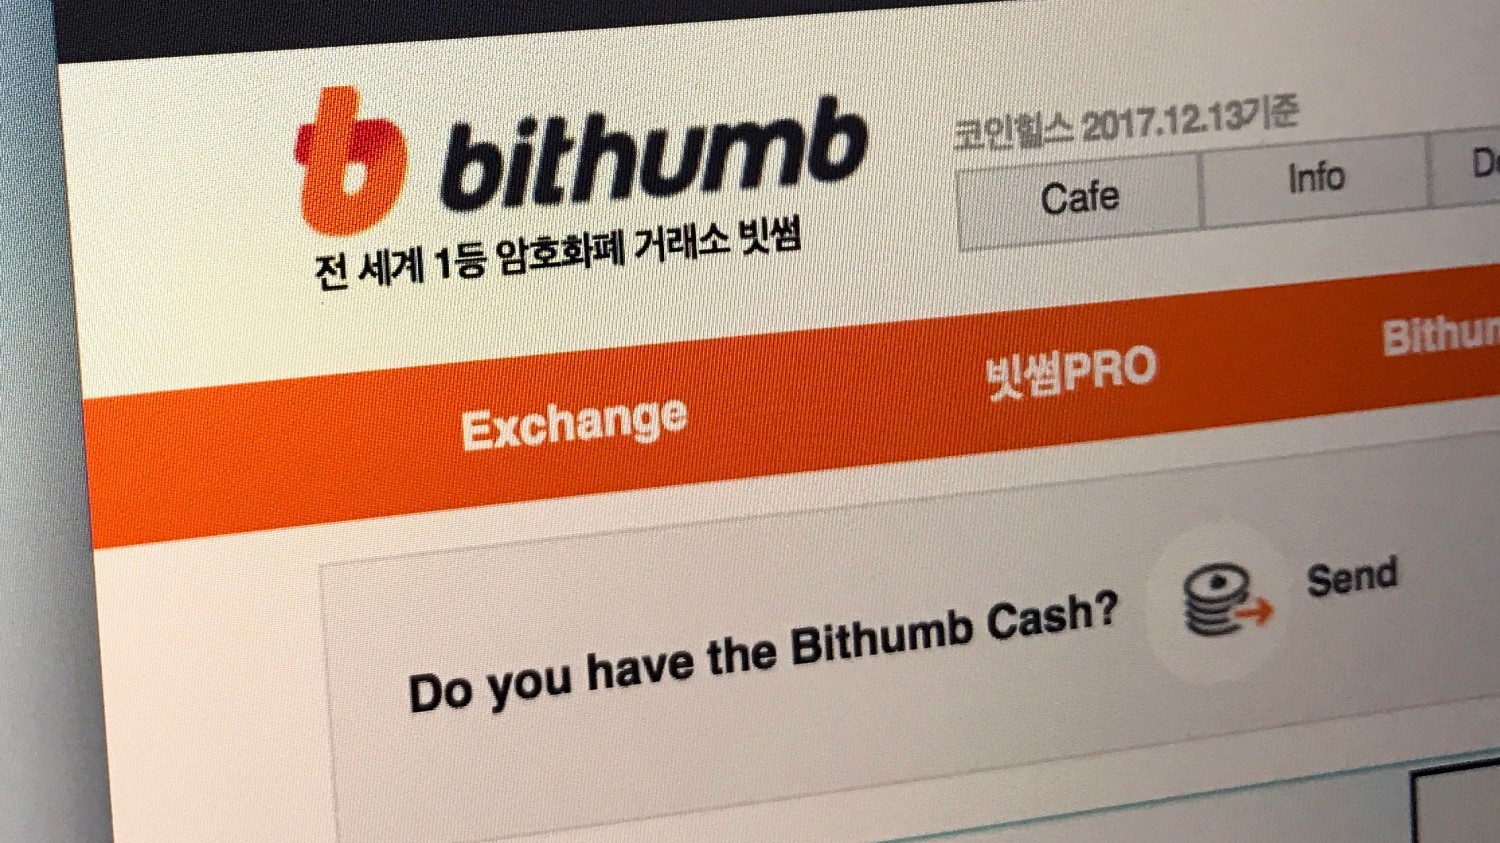 Bithumb-exchange’s-offices-raided-again-by-korean-authorities:-report